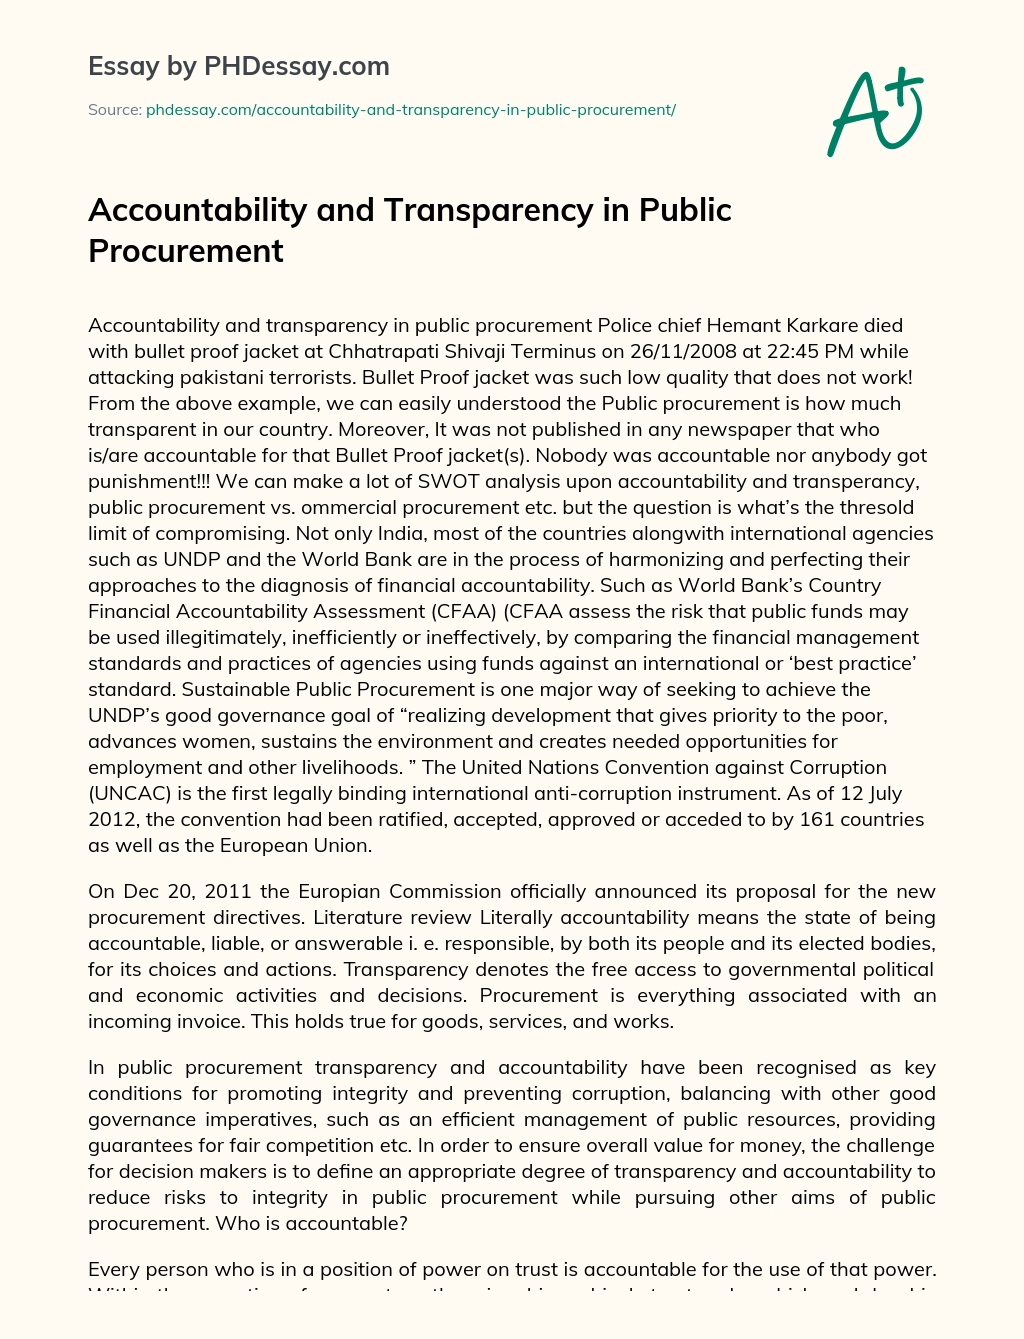 Accountability and Transparency in Public Procurement essay